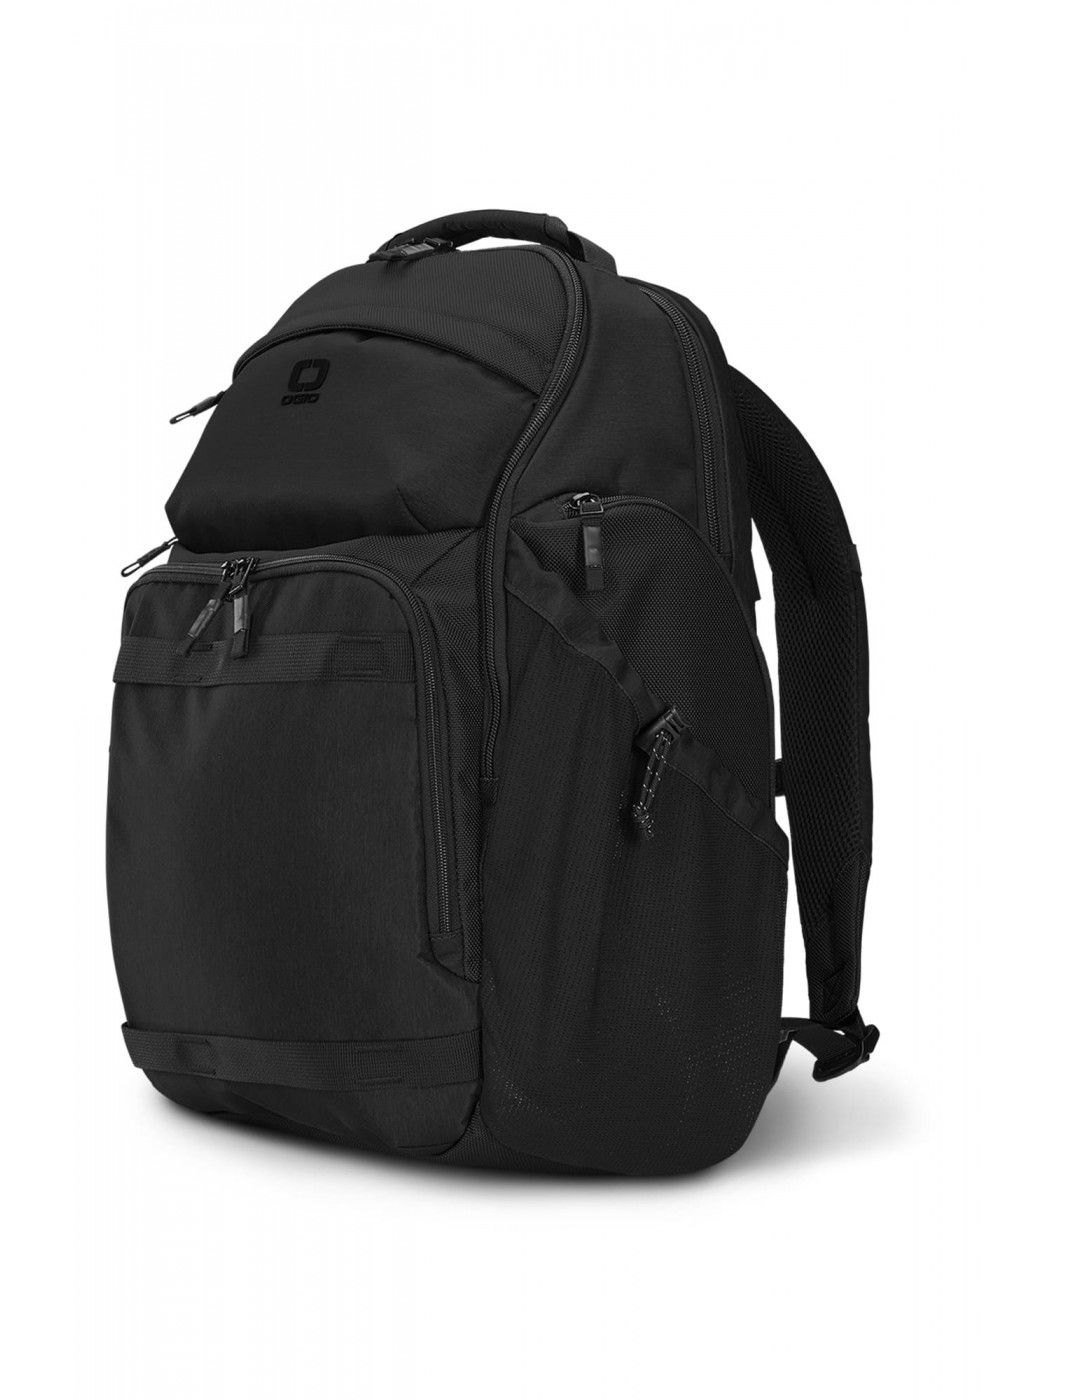 Laptop Backpack OGIO Pace 25 liters 17 inches